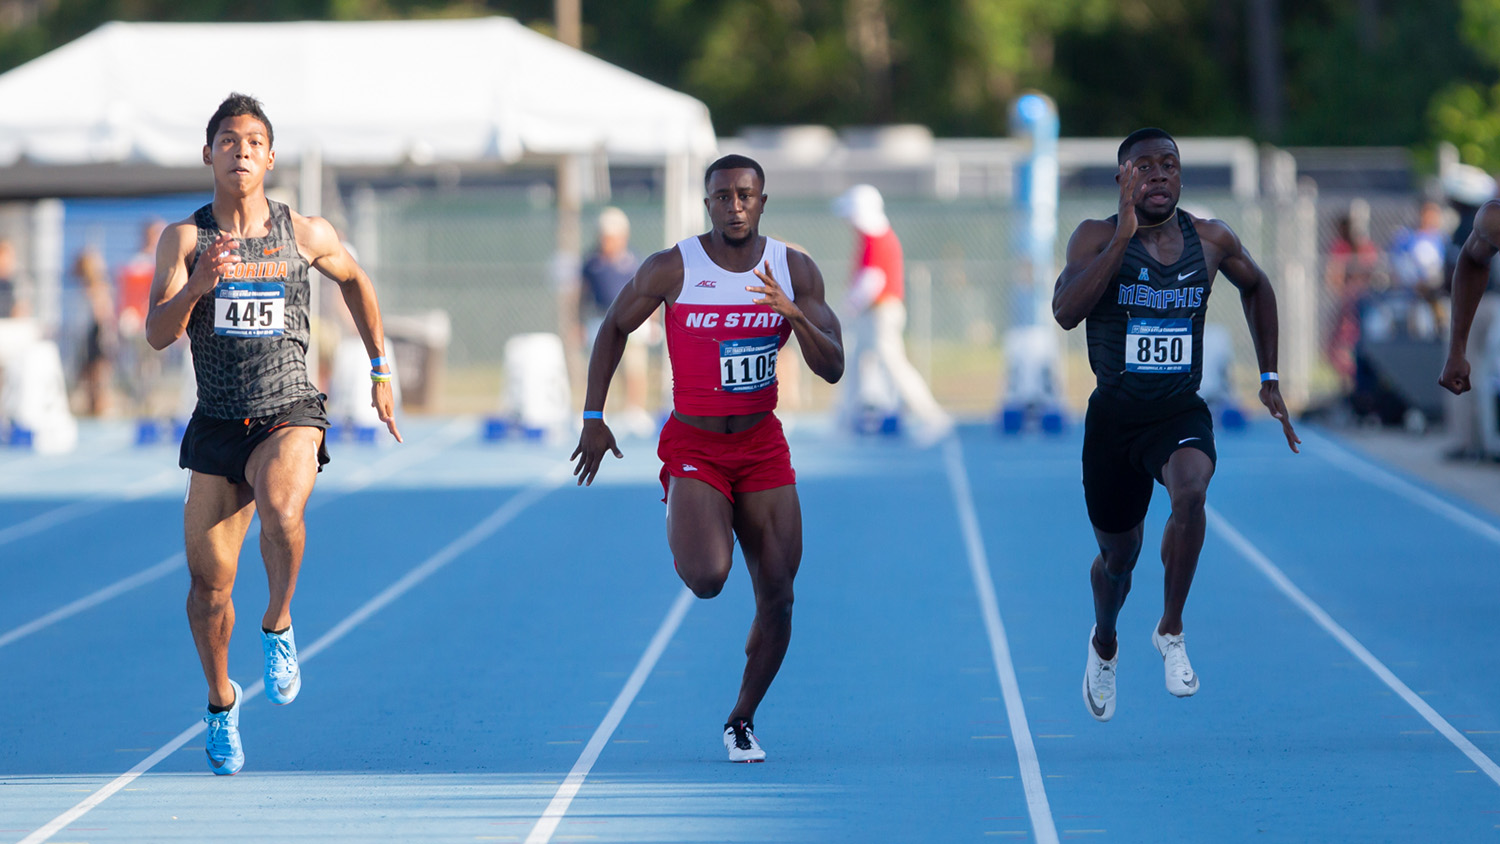 Cravont Charleston wins the 100-meter race at the USA Track and Field Championships in Eugene, Ore.